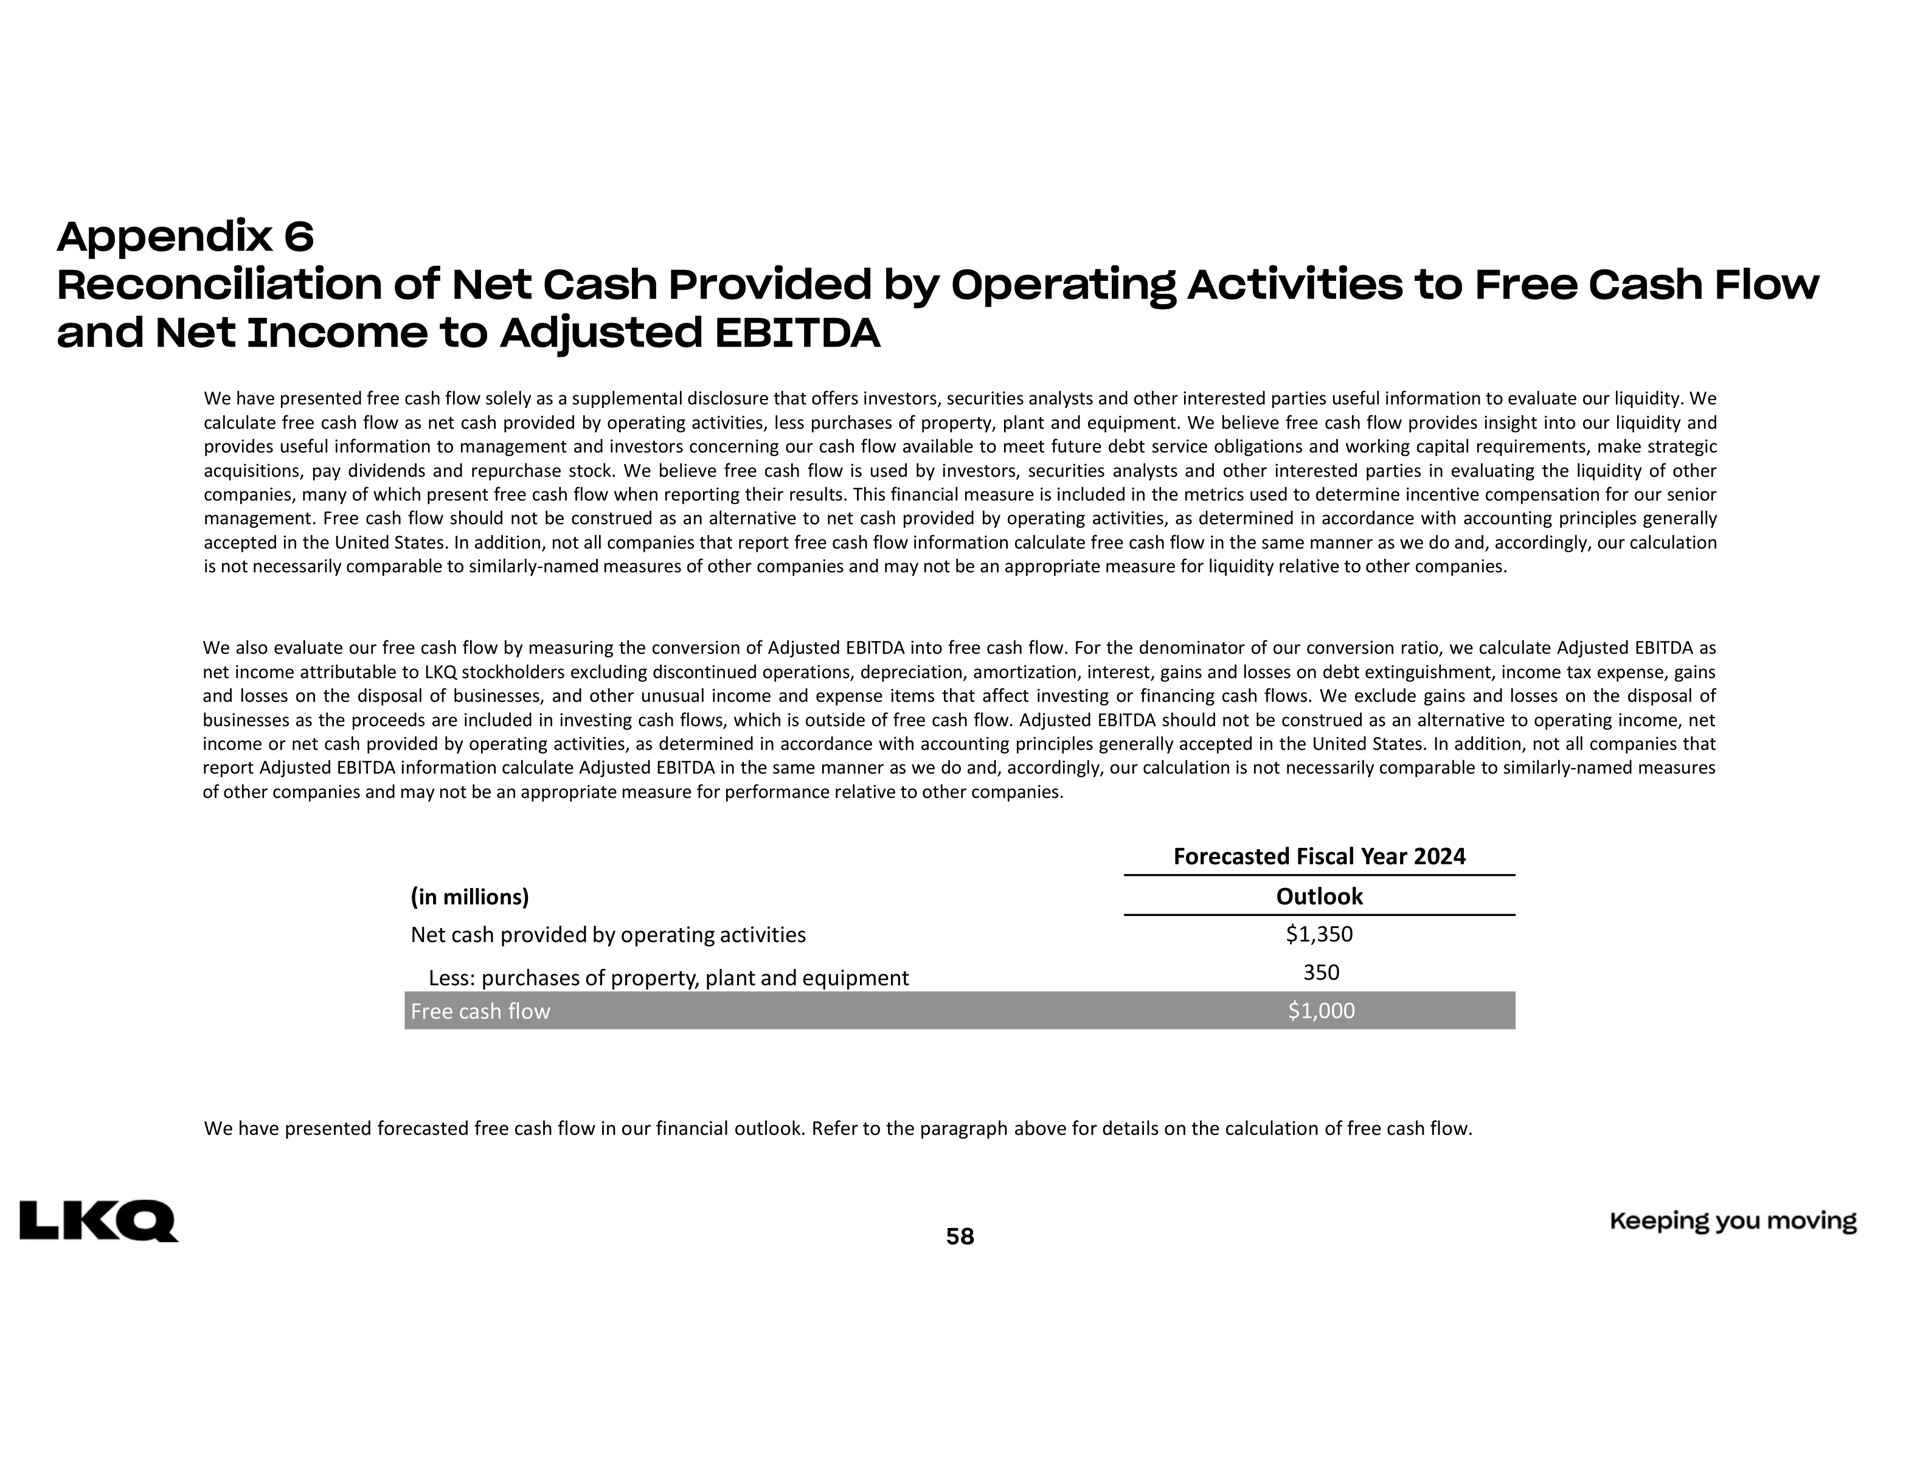 appendix reconciliation of net cash provided by operating activities to free cash flow and net income to adjusted | LKQ